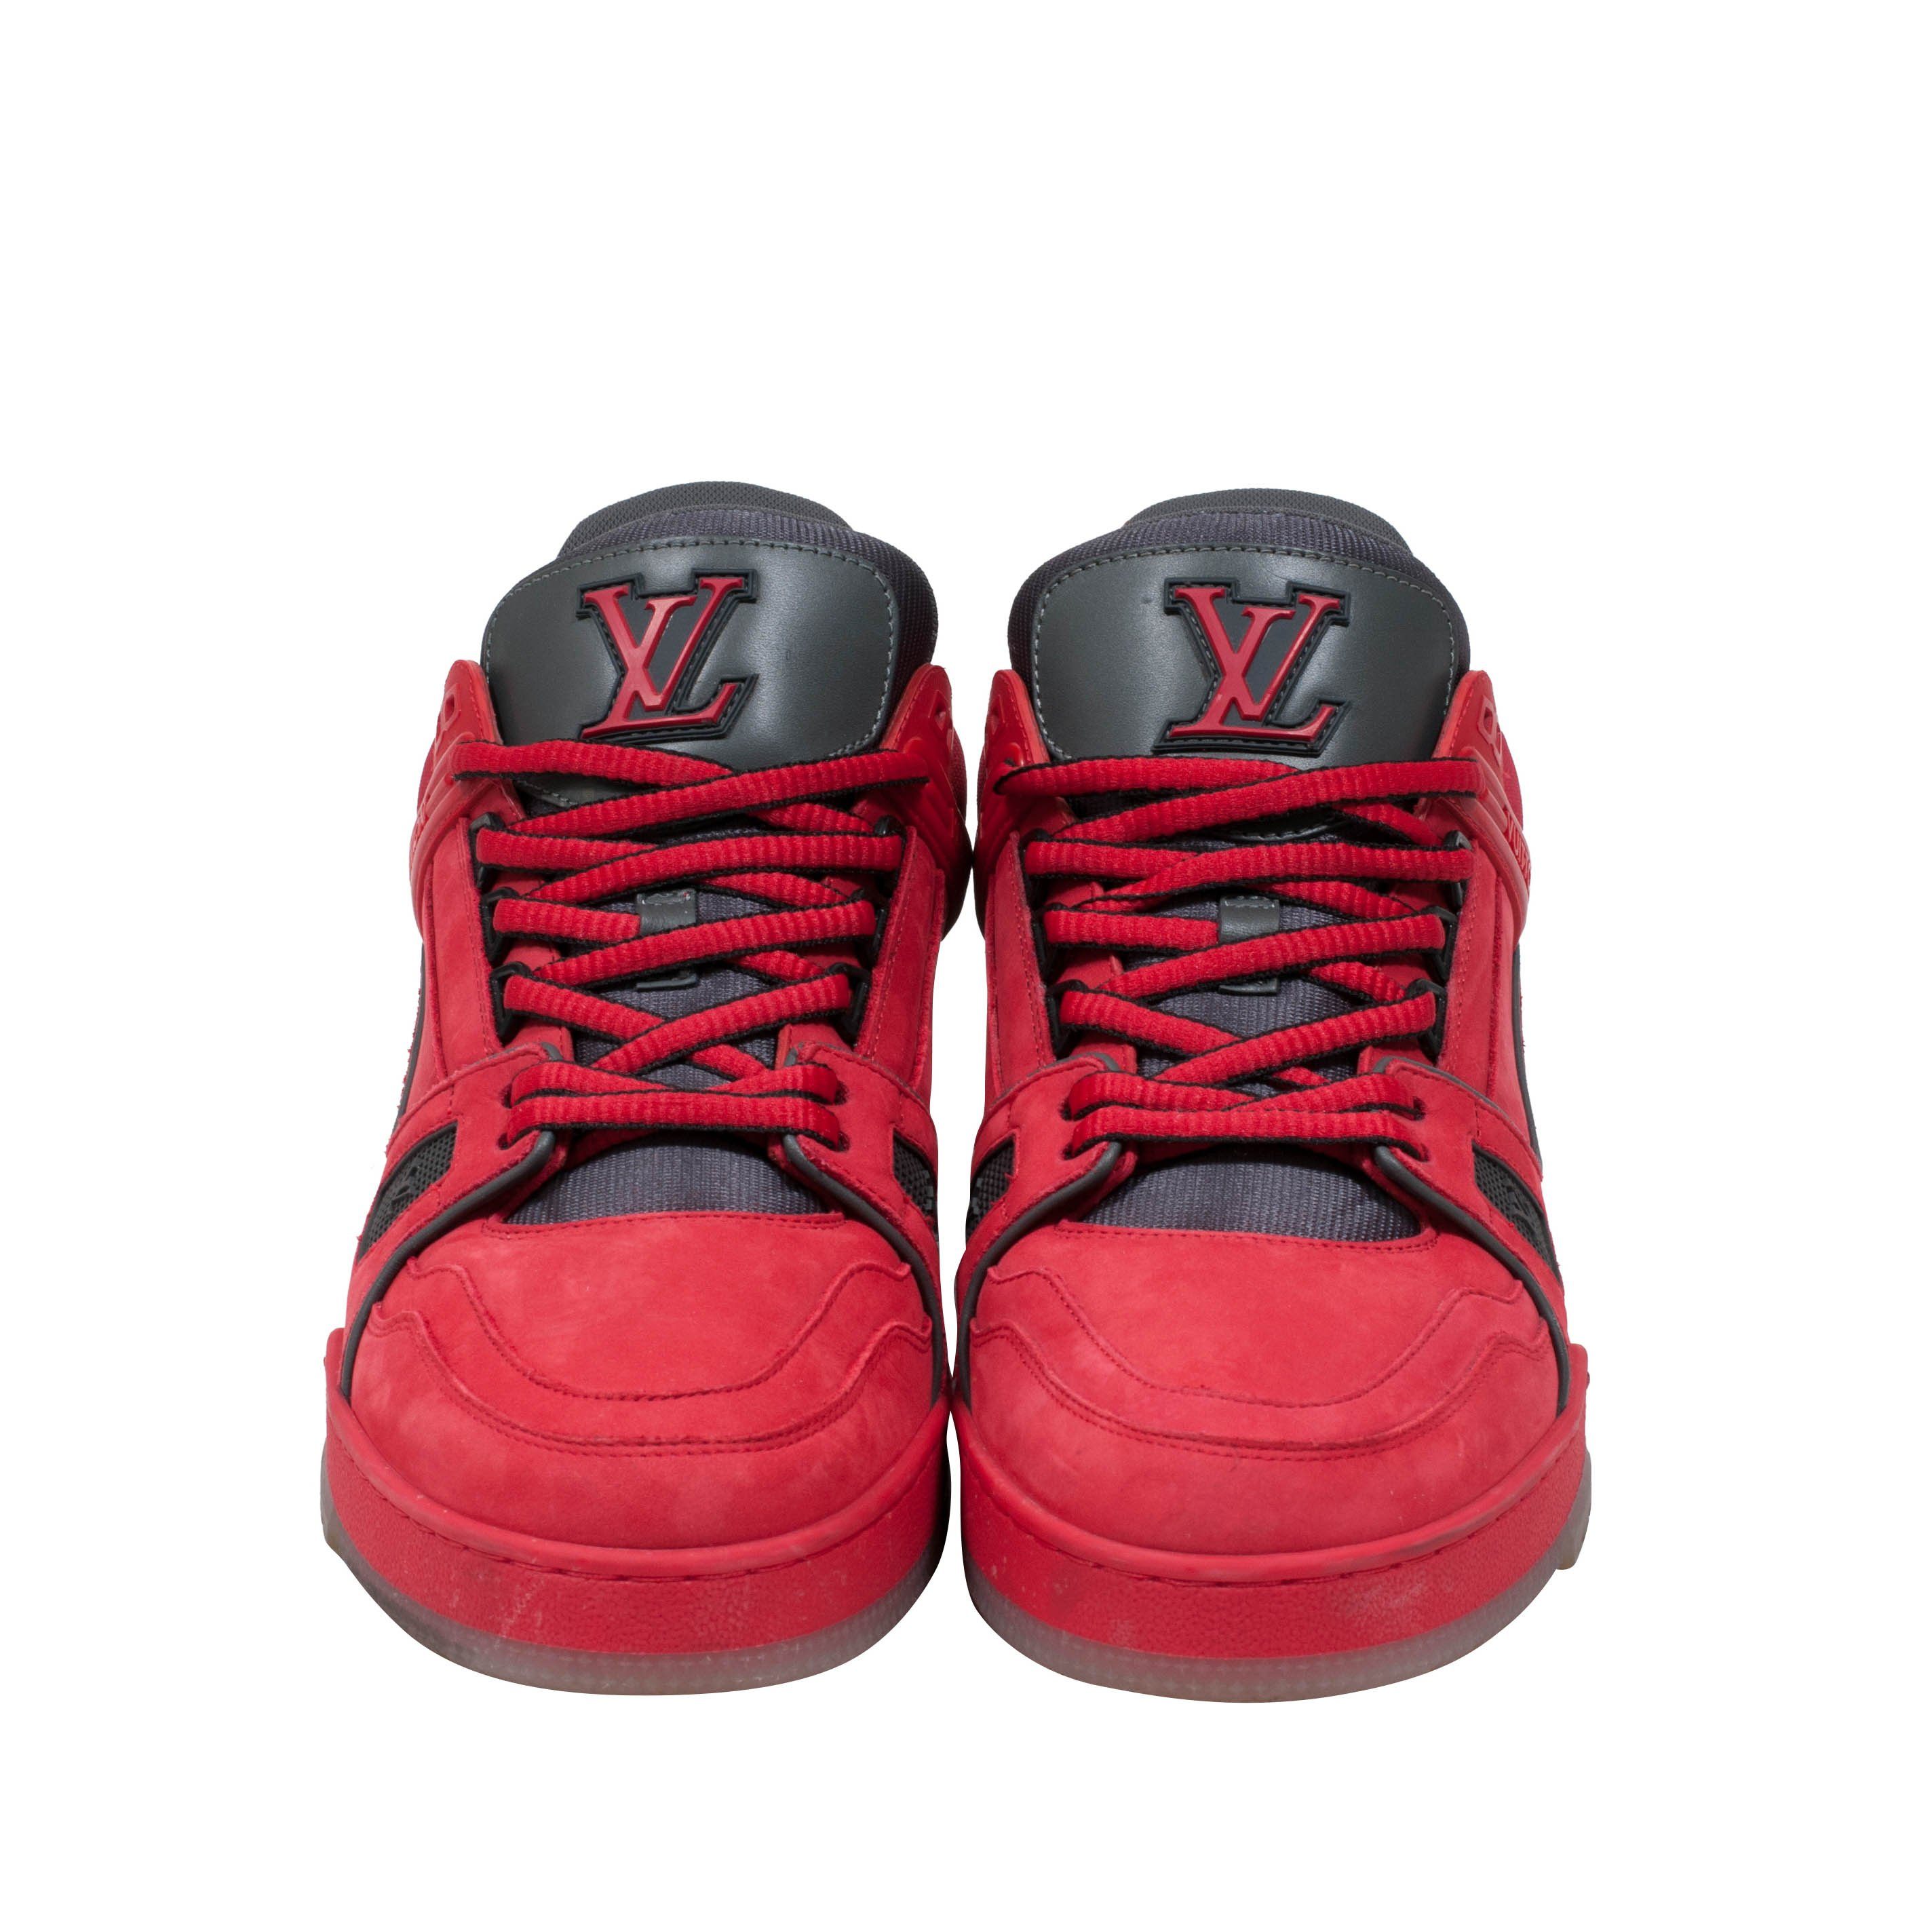 Louis Vuitton LV Trainer Sneaker Red. Size 06.0